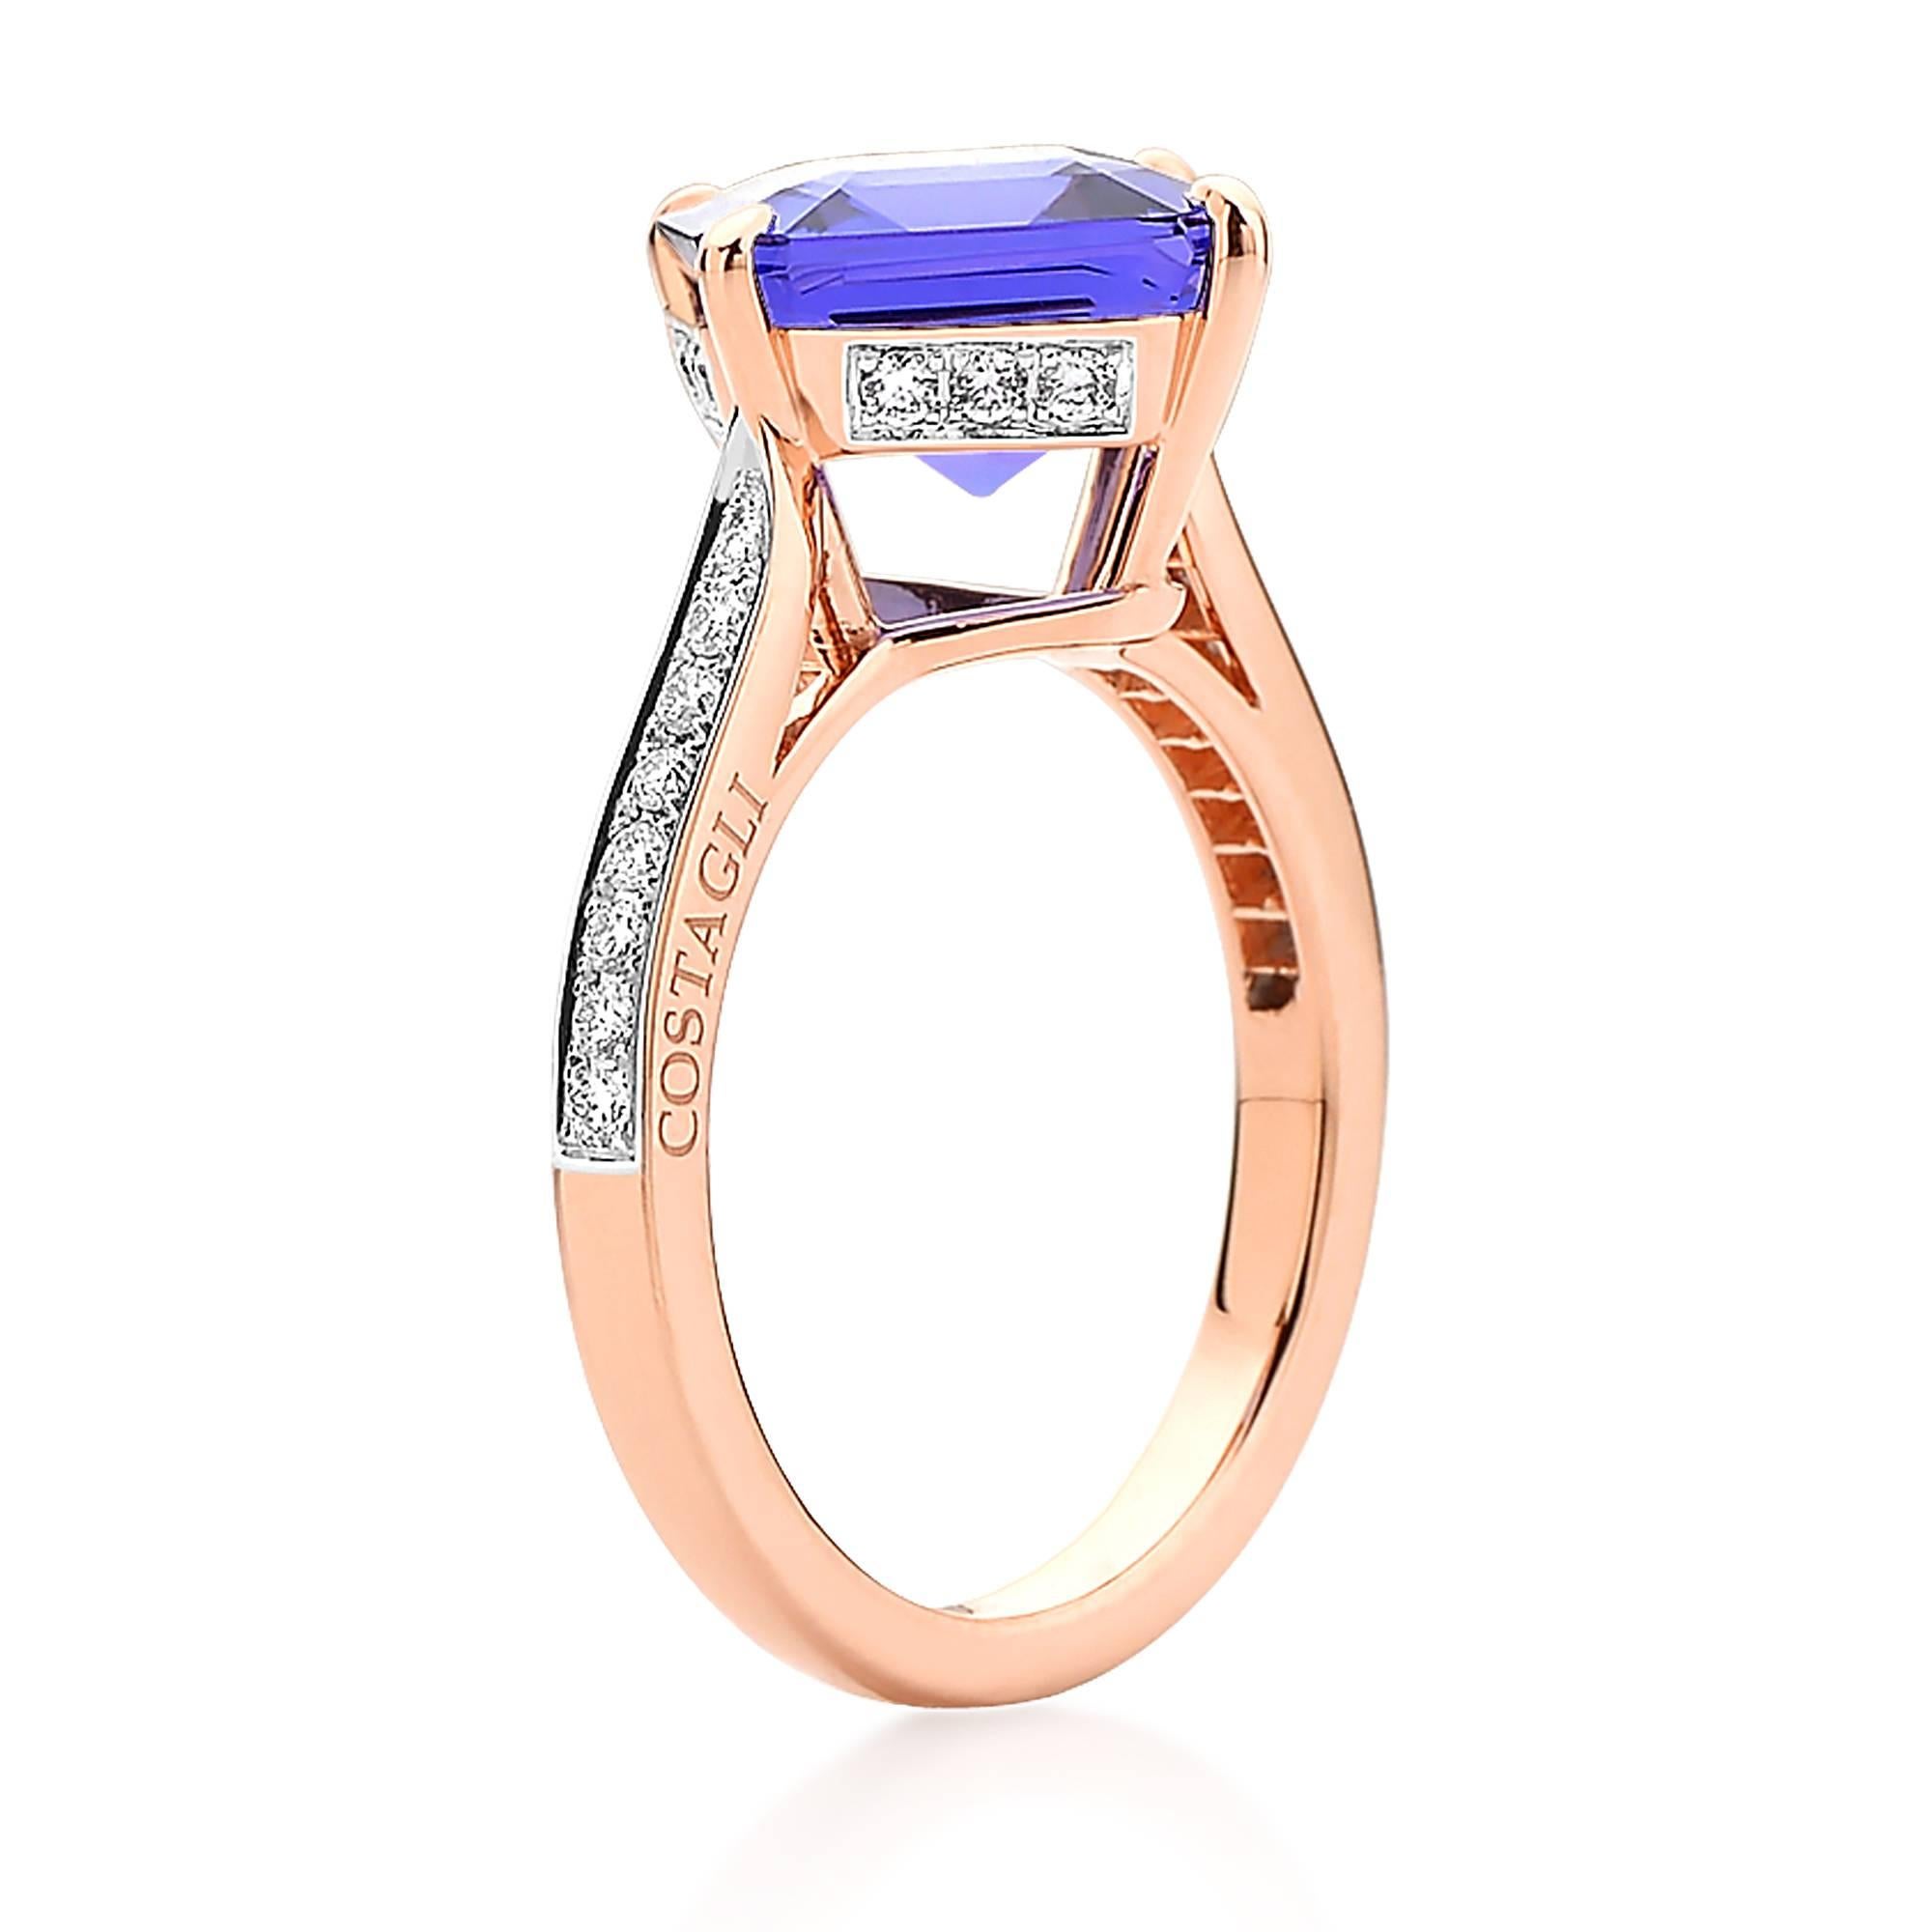 One of a kind emerald cut tanzanite 4.30 carat ring set in 18kt rose gold with pave-set round, brilliant diamonds, 0.27 carats.

A very clean look is the at the base of this emerald cut Tanzanite ring set with diamonds.

Worn as right hand ring or